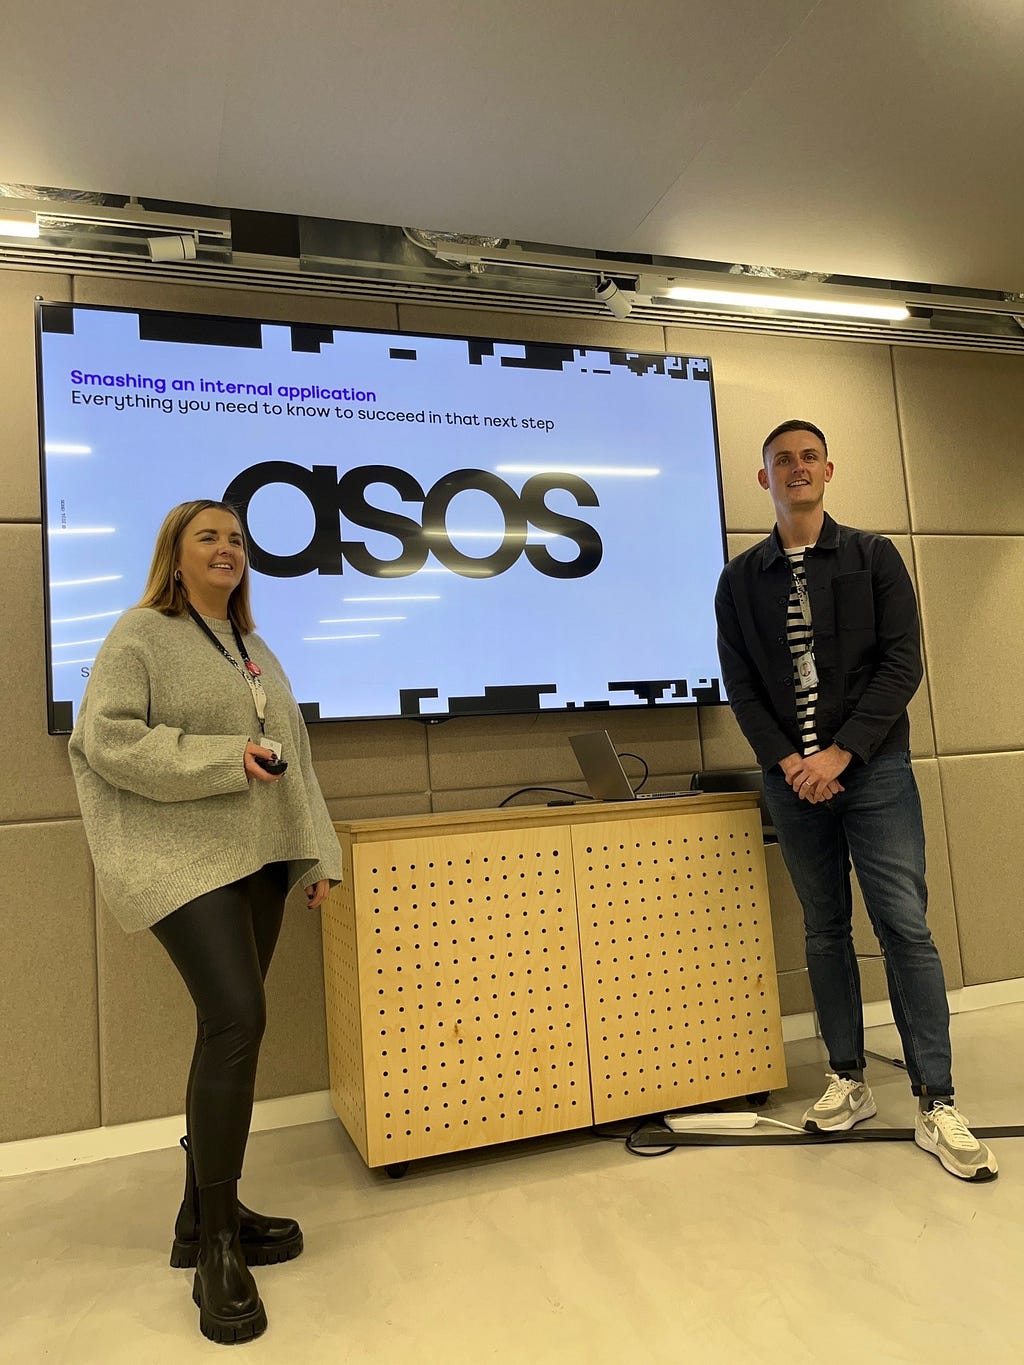 Two ASOSers, Lauren and James, standing in front of a presentation screen that reads ‘Smashing an internal application. Everything you need to know to succeed in that next step’.